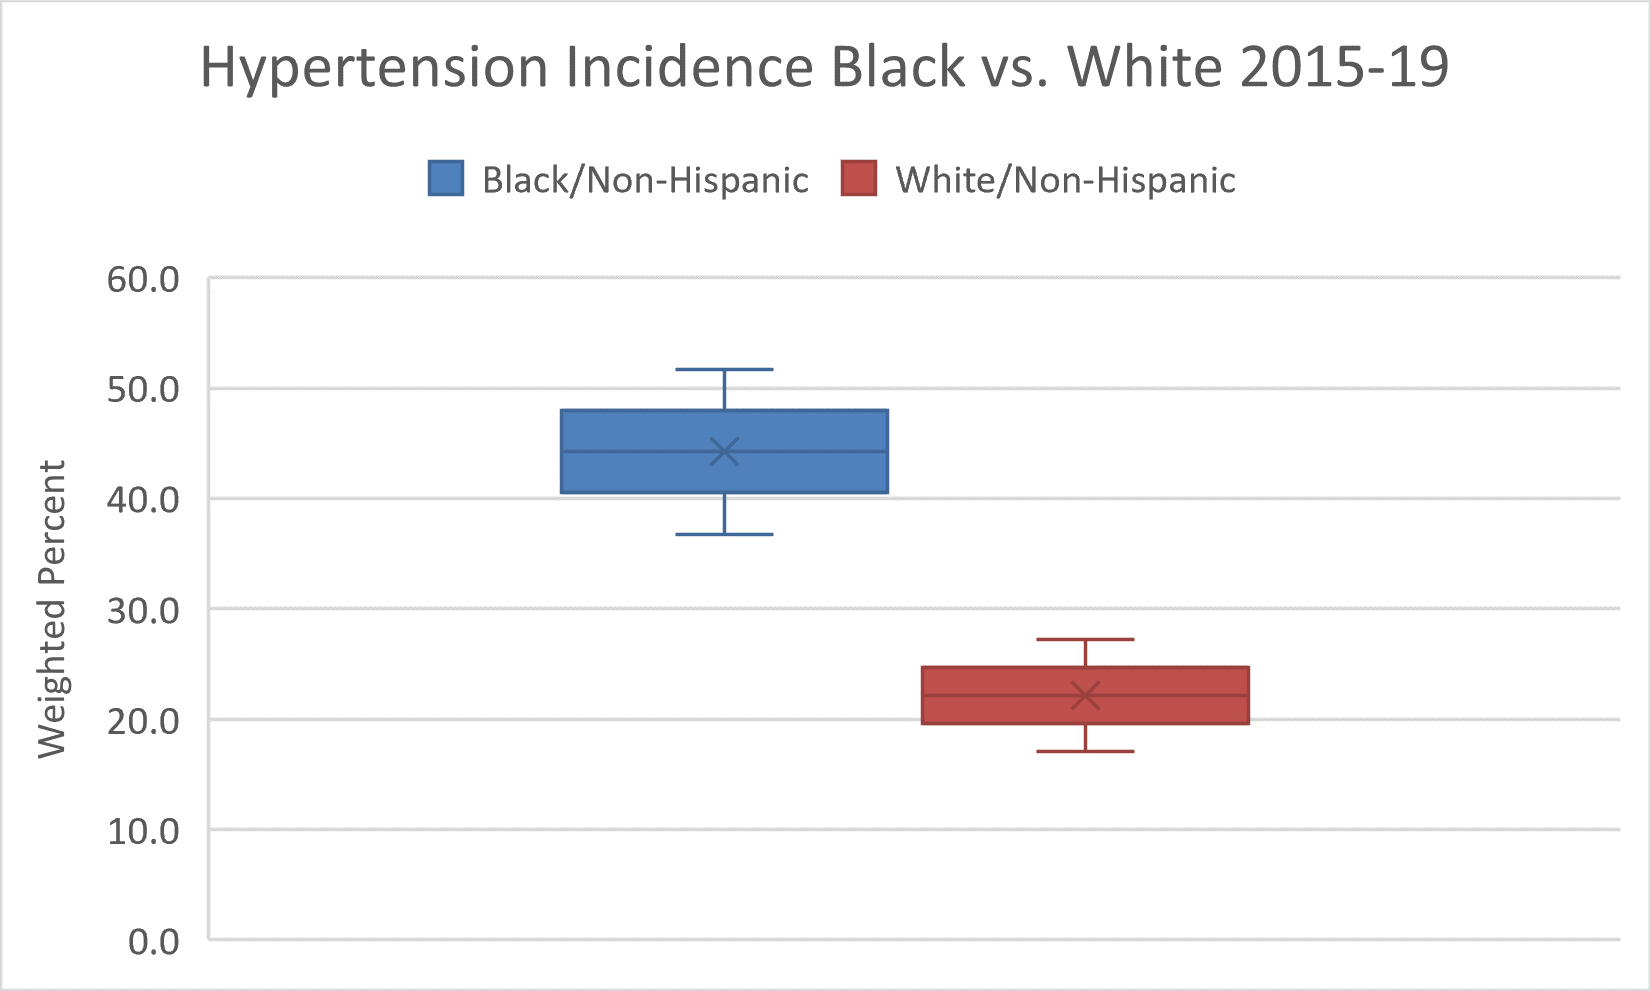 Box and whisker plot showing that Blacks have higher incidence rates of high blood pressure, or hypertension, than Whites from 2015-2019.